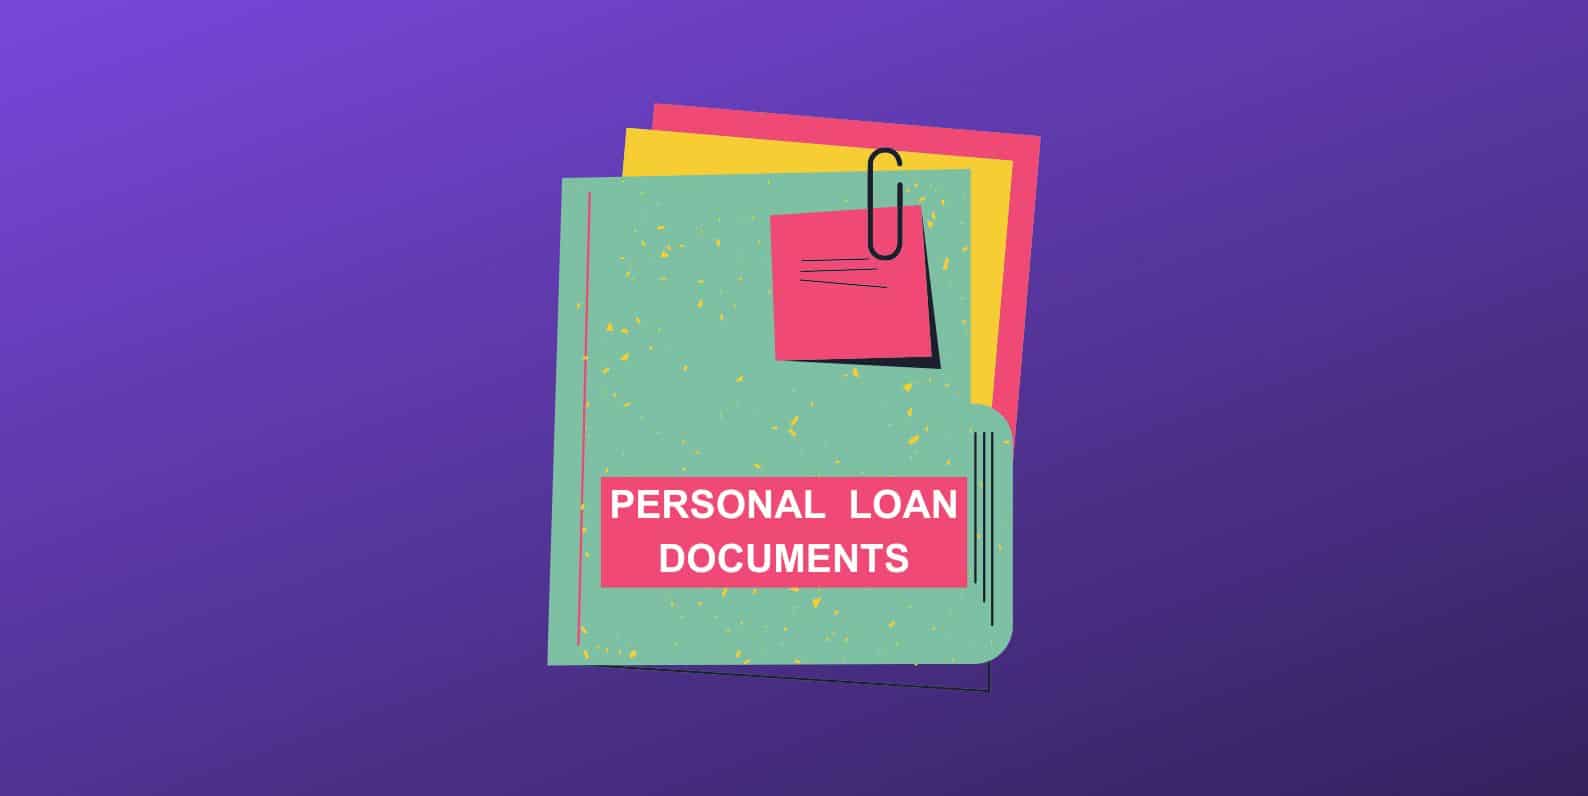 Required Documents for Personal Loan in India